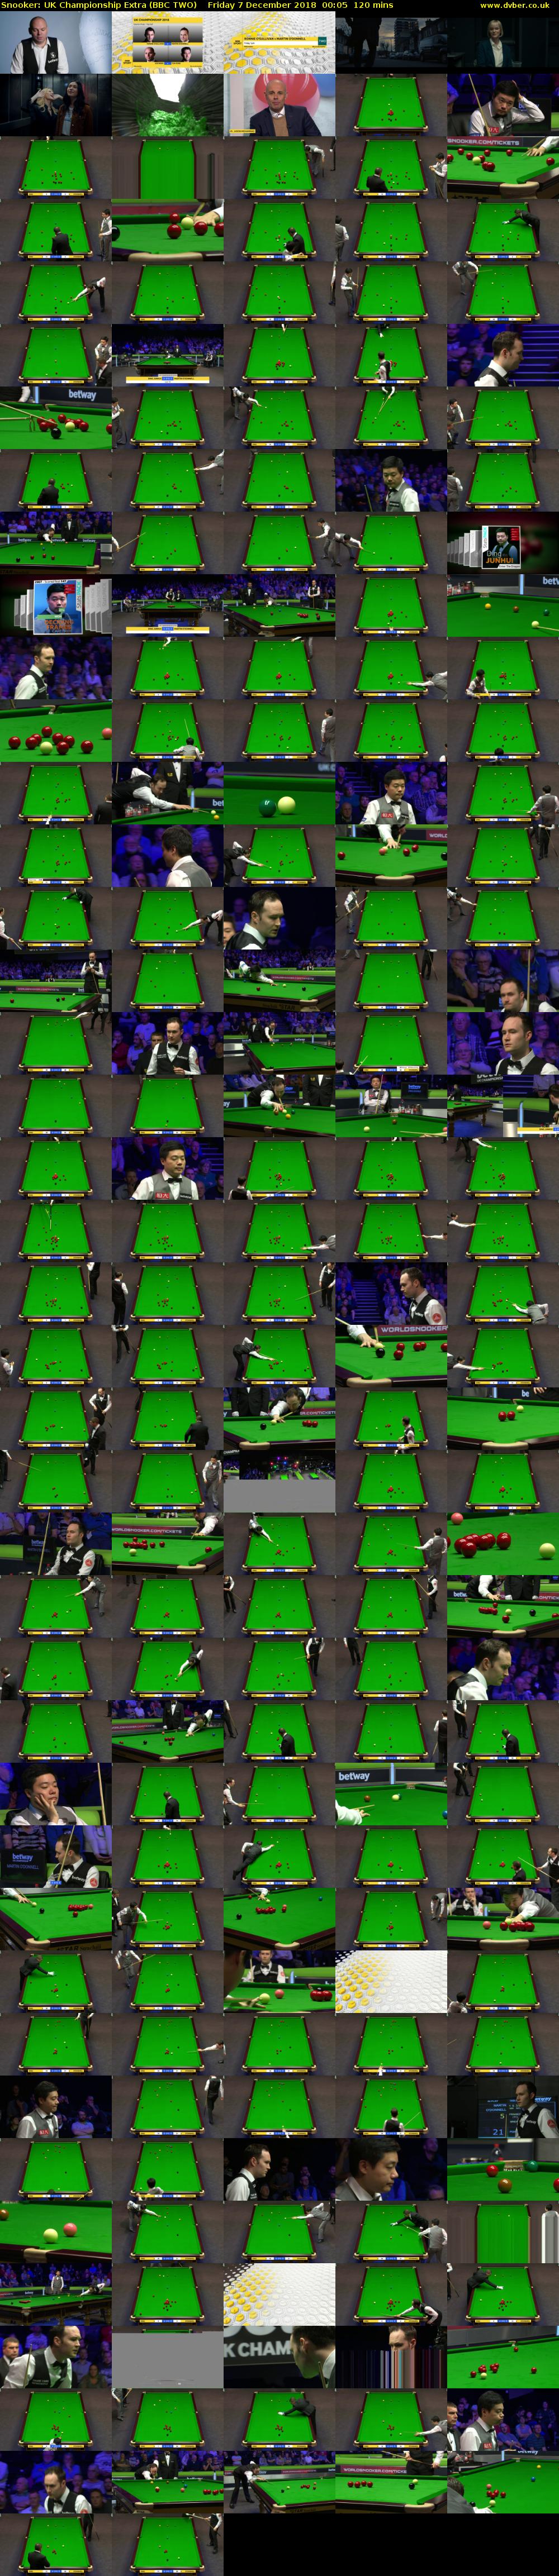 Snooker: UK Championship Extra (BBC TWO) Friday 7 December 2018 00:05 - 02:05